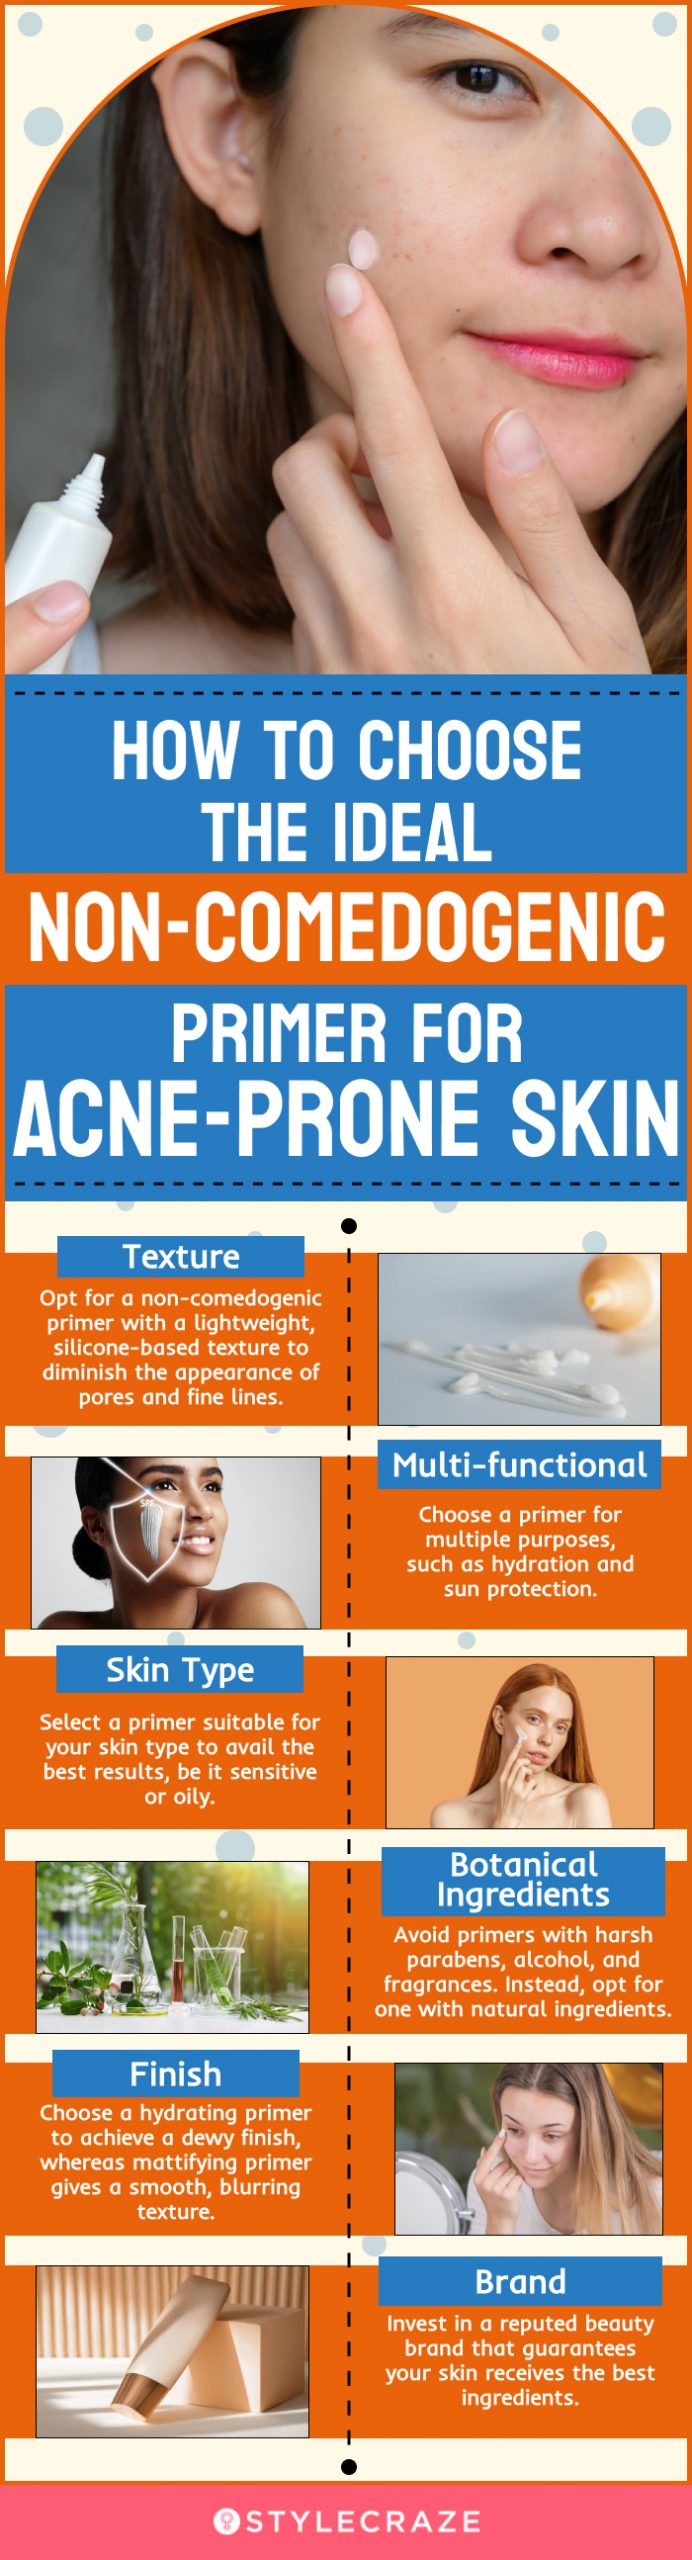 How To Choose The Ideal Non-Comedogenic Primer For Acne-Prone Skin